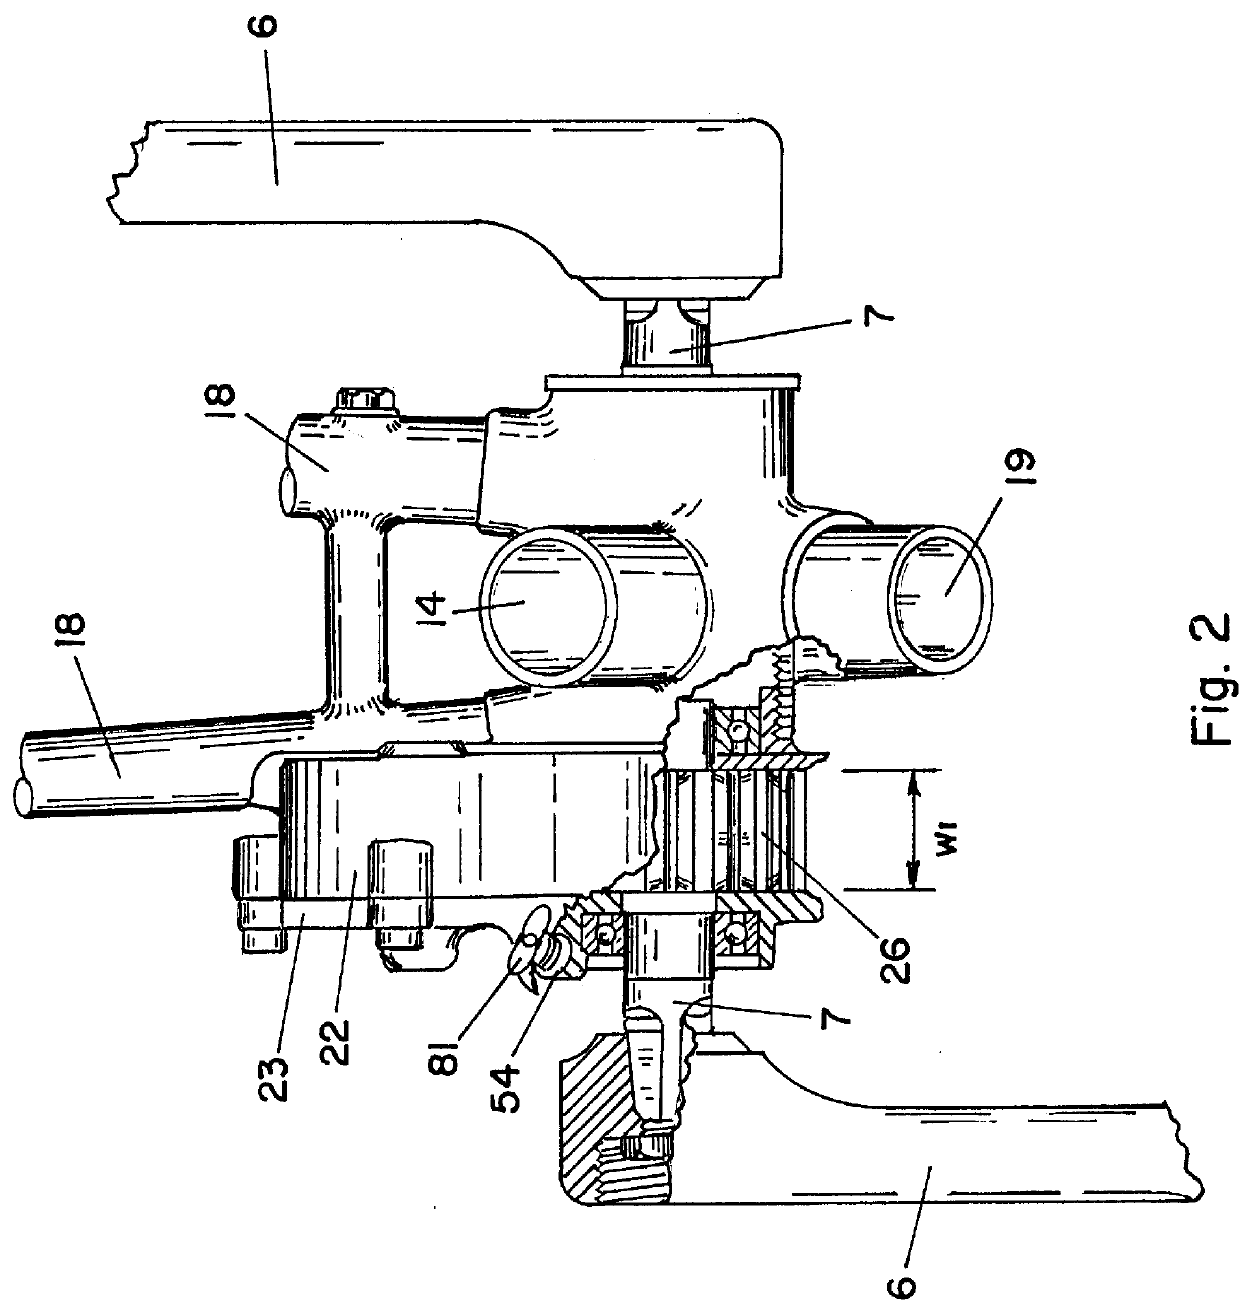 Hydraulic transmission for bicycles